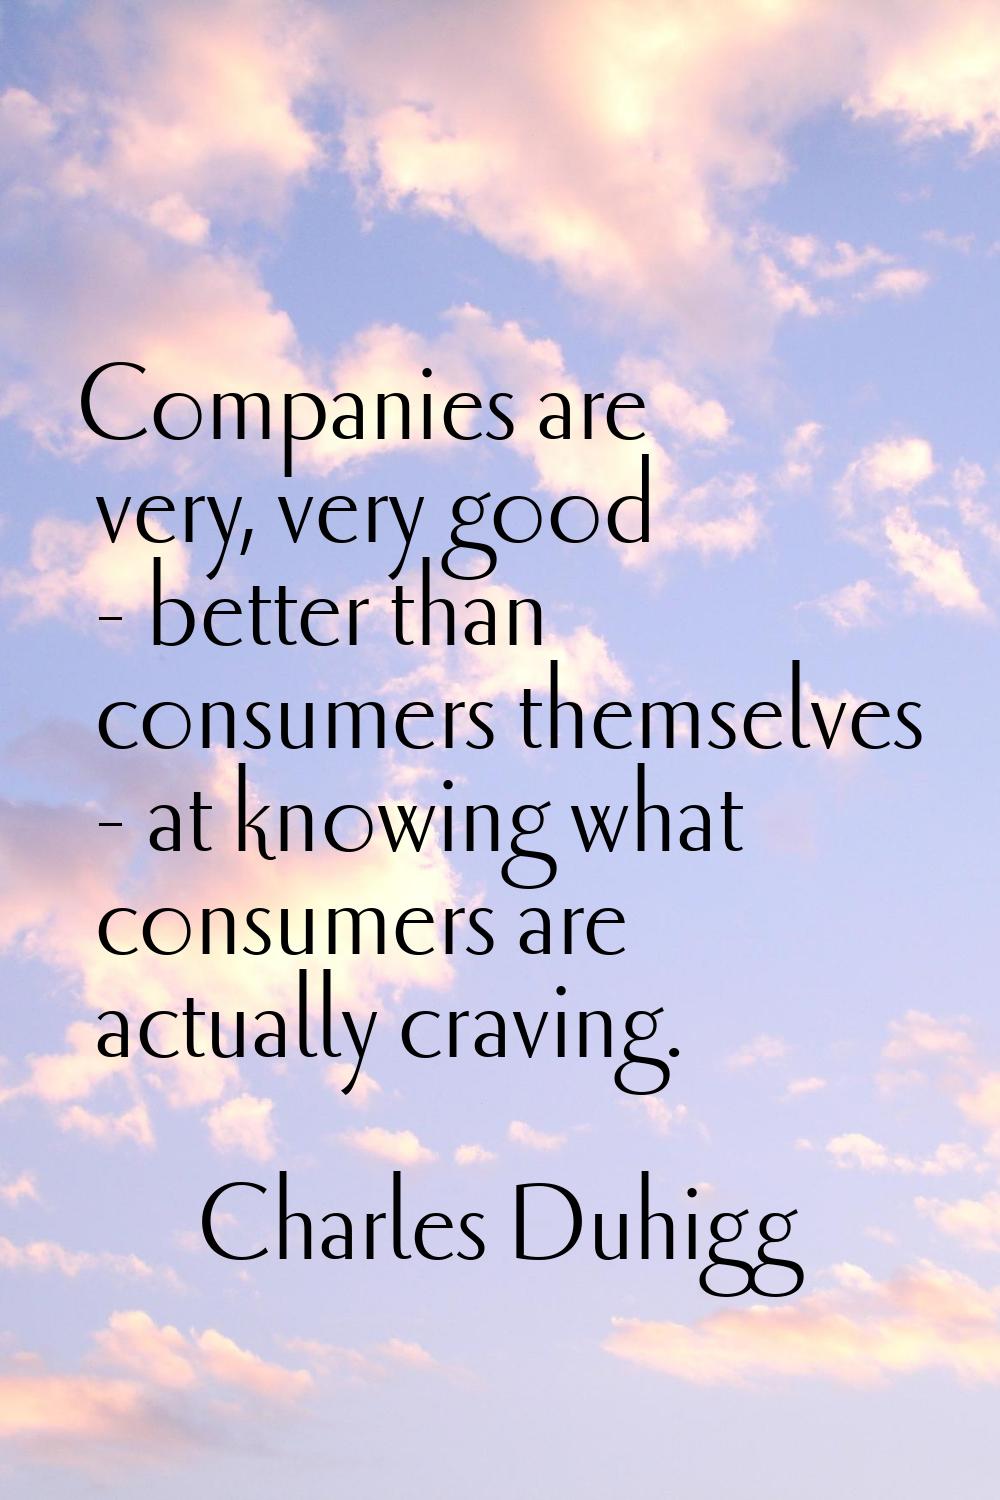 Companies are very, very good - better than consumers themselves - at knowing what consumers are ac